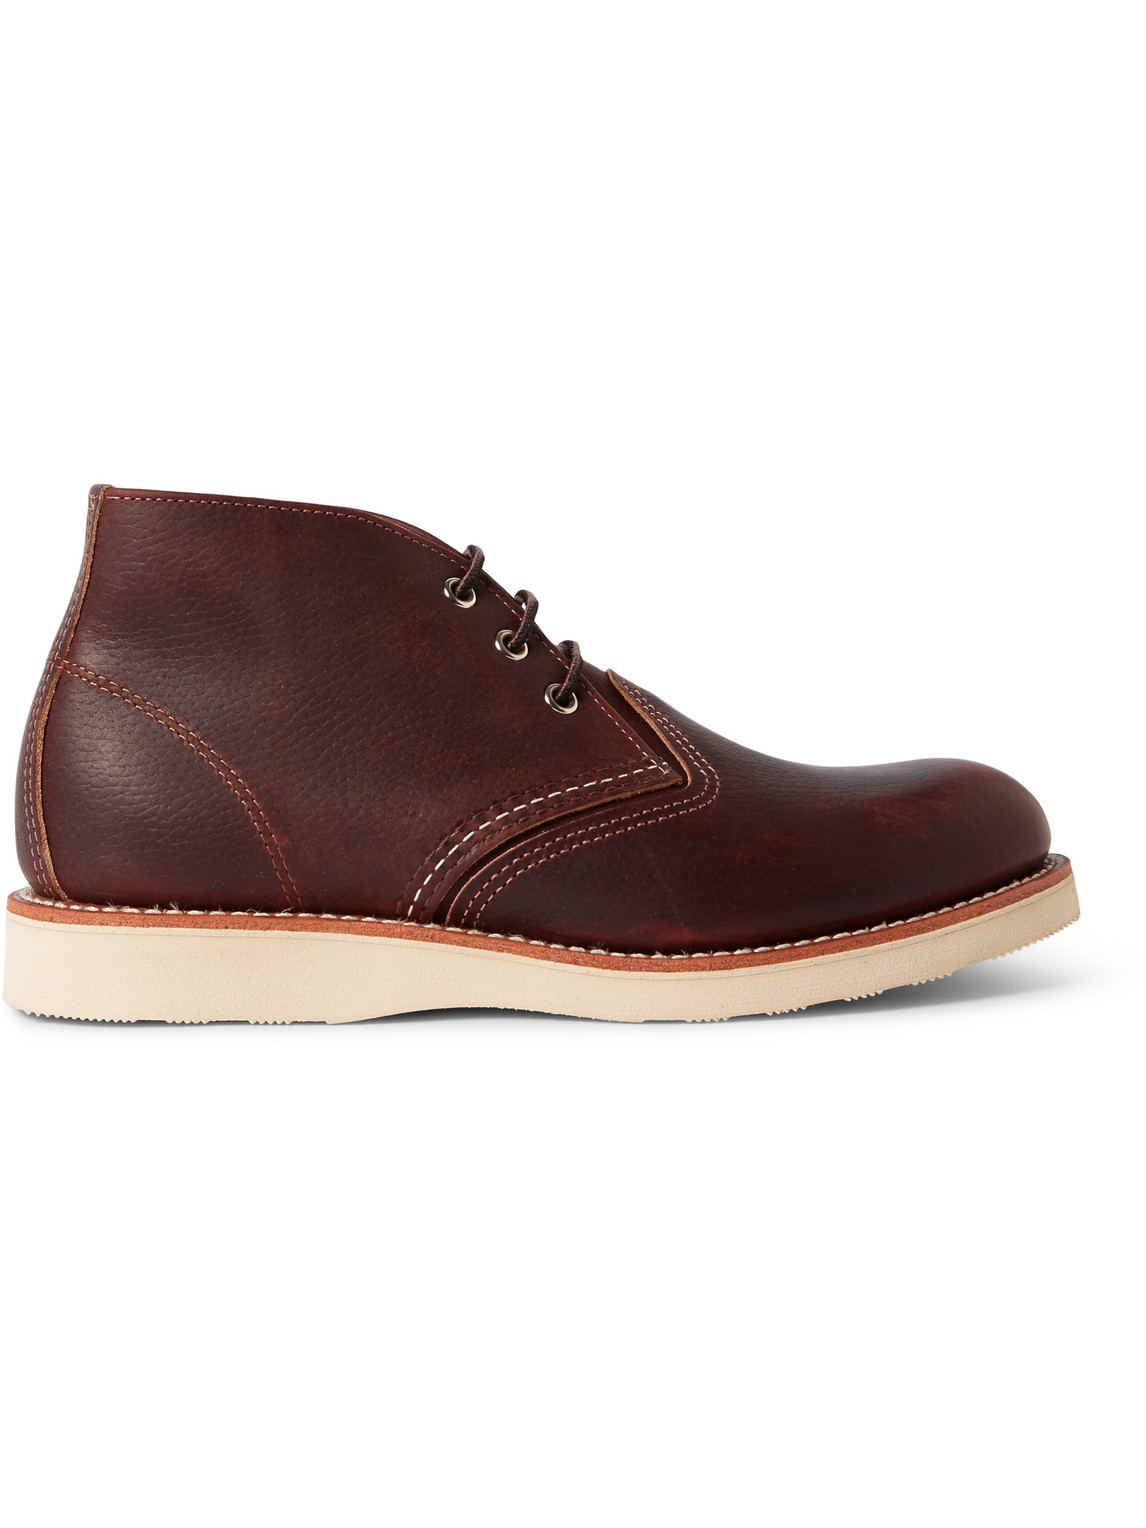 RED WING SHOES WORK LEATHER CHUKKA BOOTS